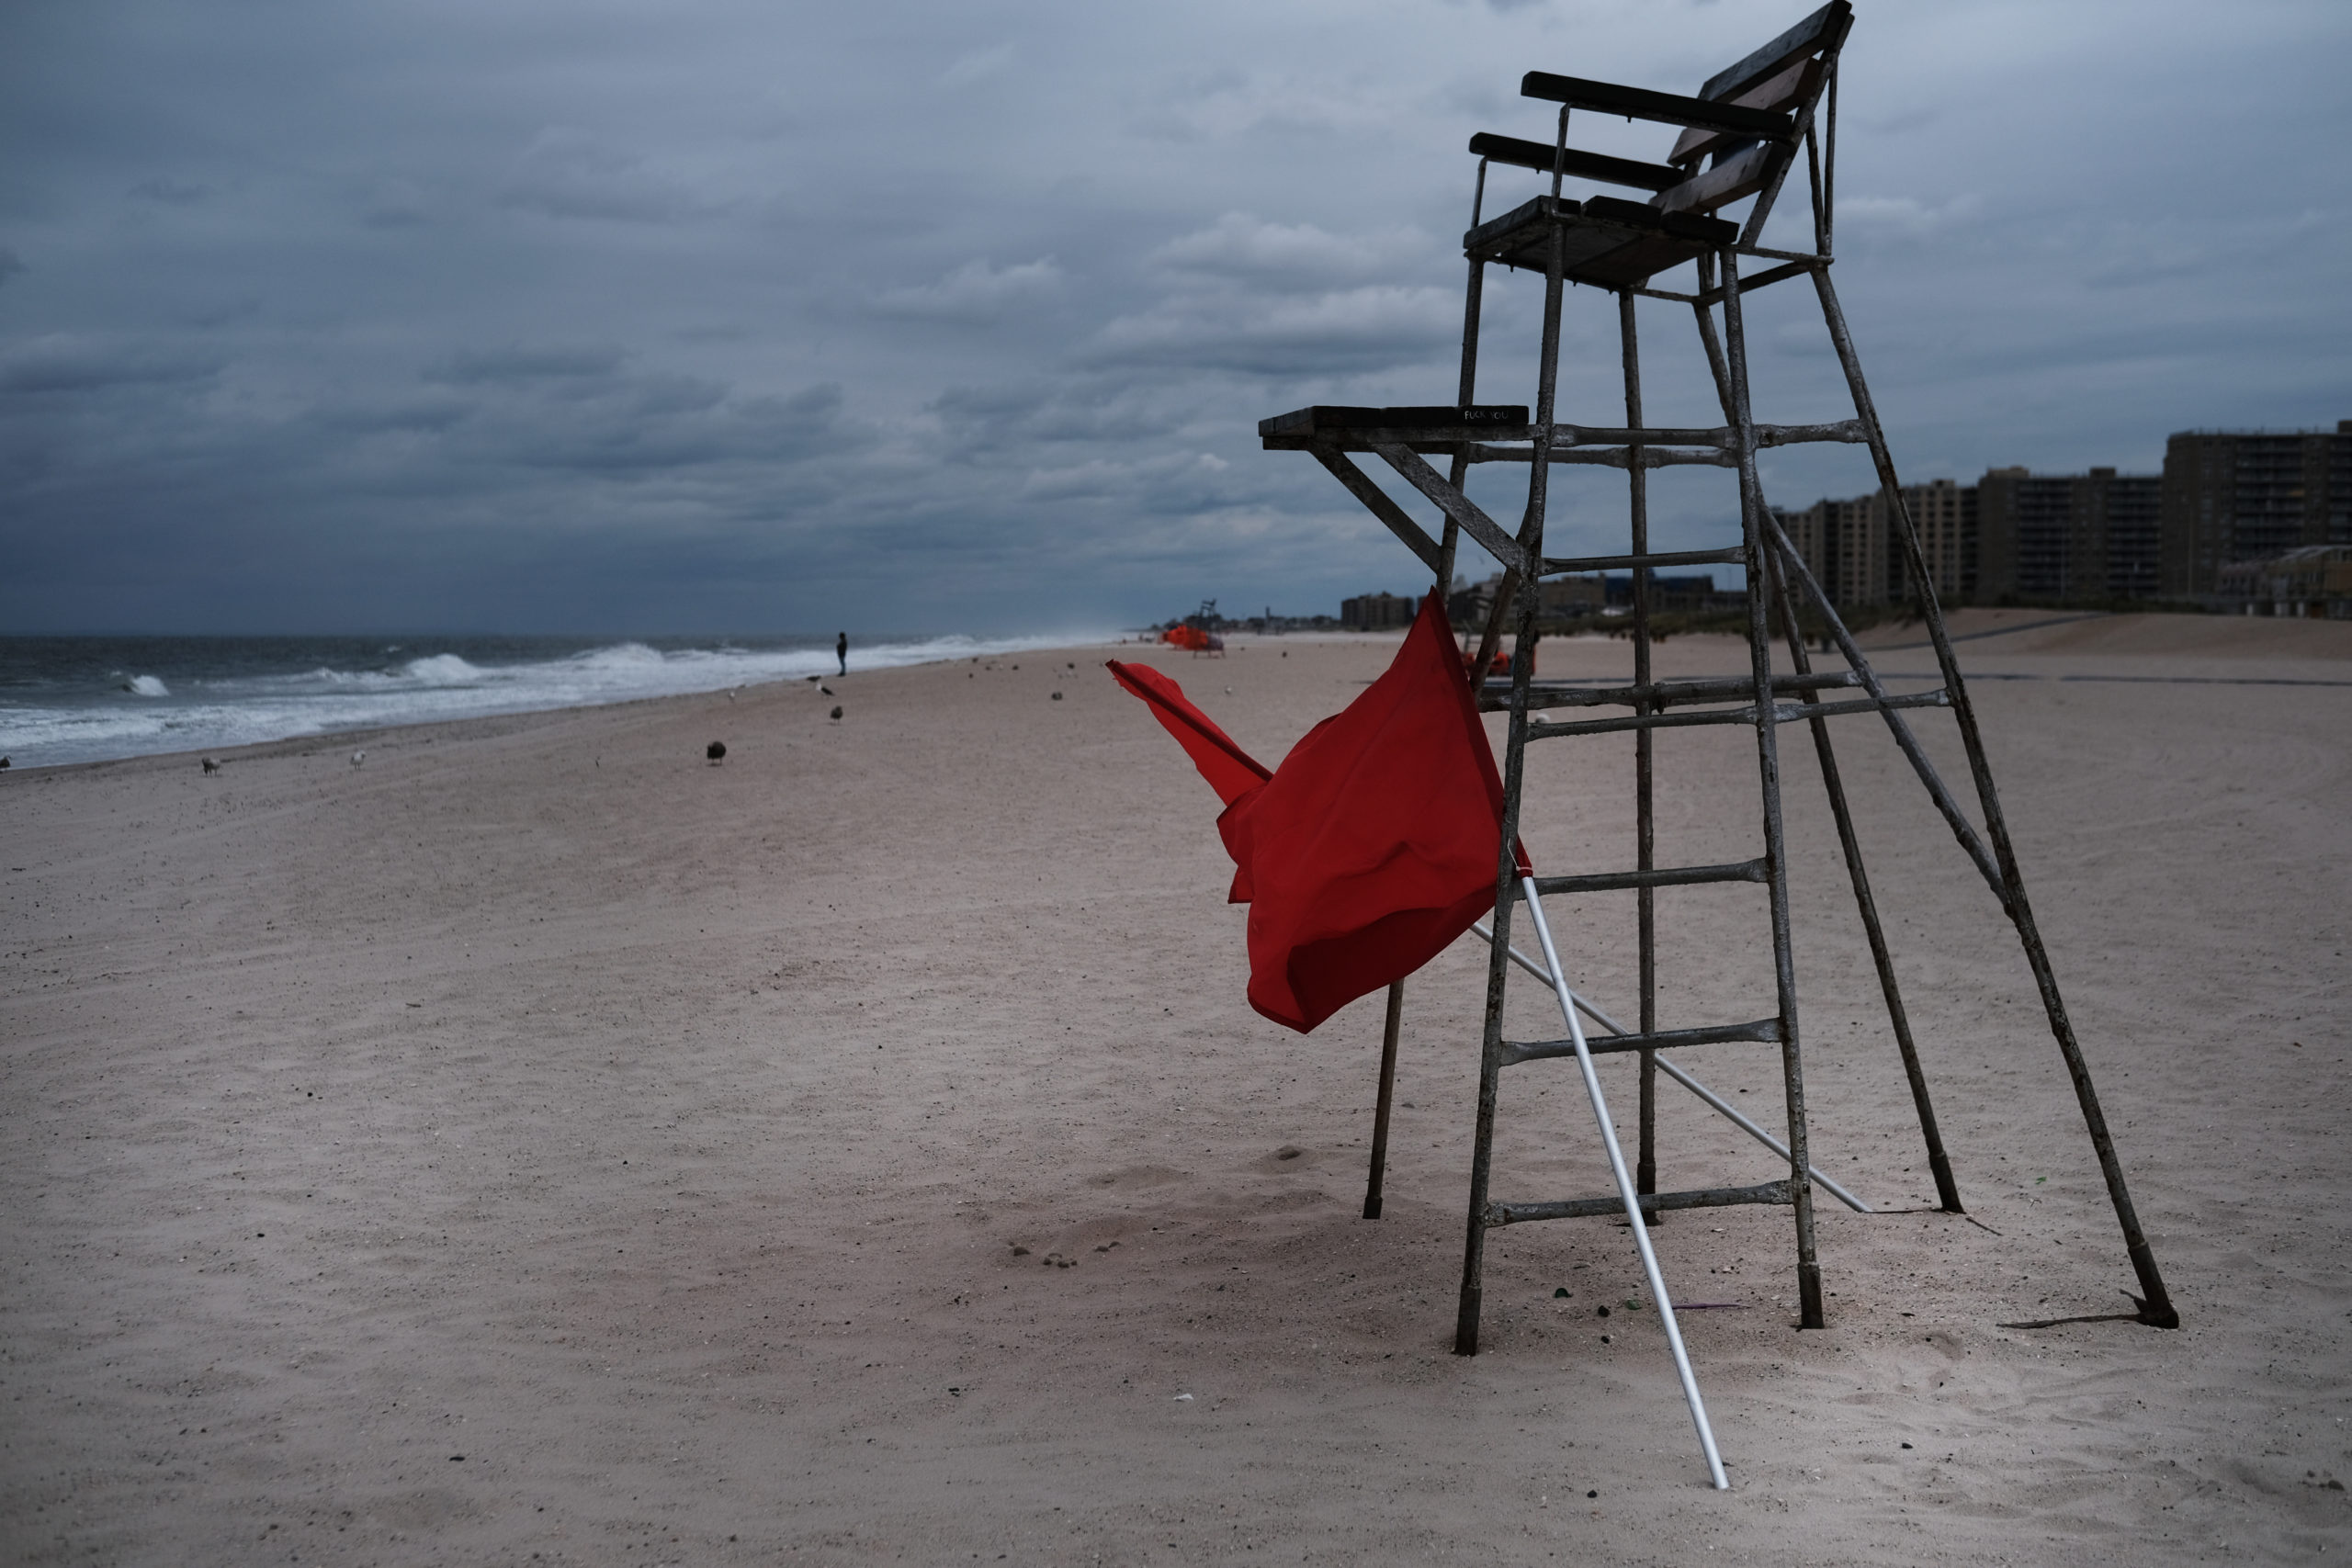 NEW YORK, NEW YORK - SEPTEMBER 06: An empty lifeguard chair stands at Rockaway Beach as swimming and surfing is temporarily banned due to strong rip currents from Hurricane Dorian on September 06, 2019 in New York City. The massive hurricane that devastated the Bahamas, has weakened to a category 1 storm after making landfall over Cape Hatteras. (Photo by Spencer Platt/Getty Images)